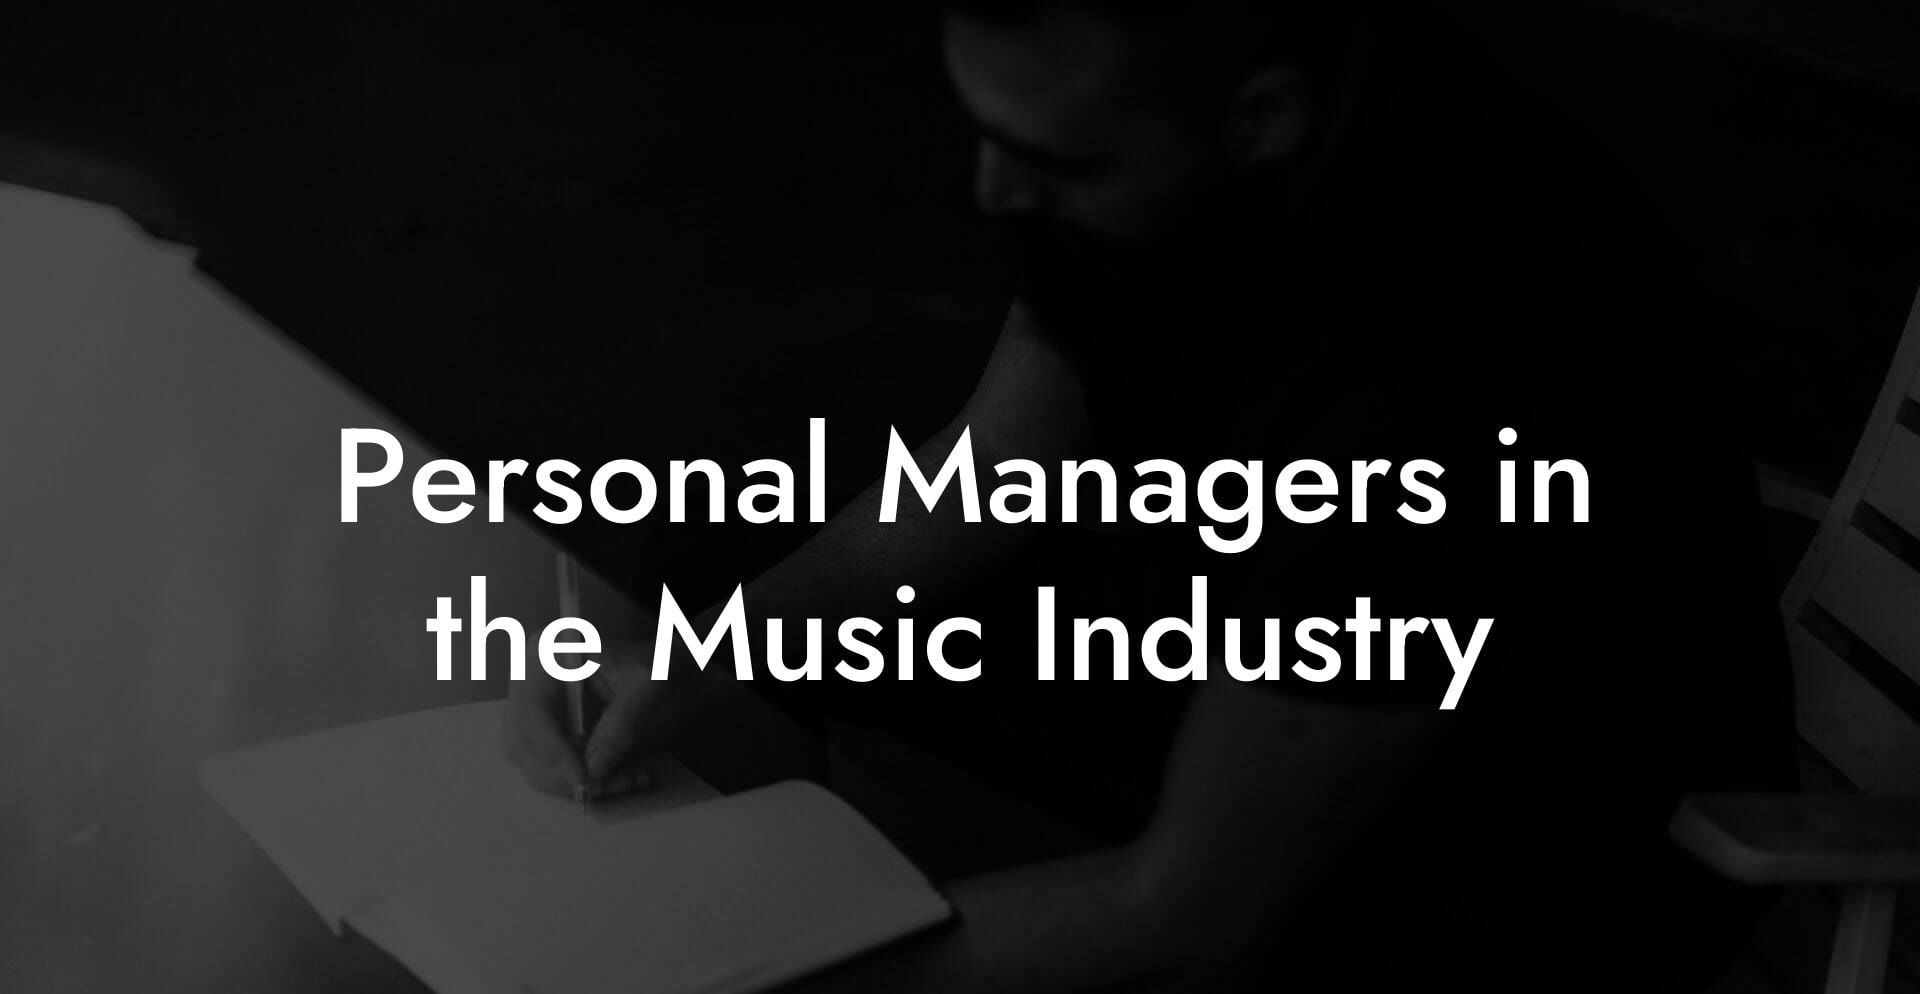 Personal Managers in the Music Industry